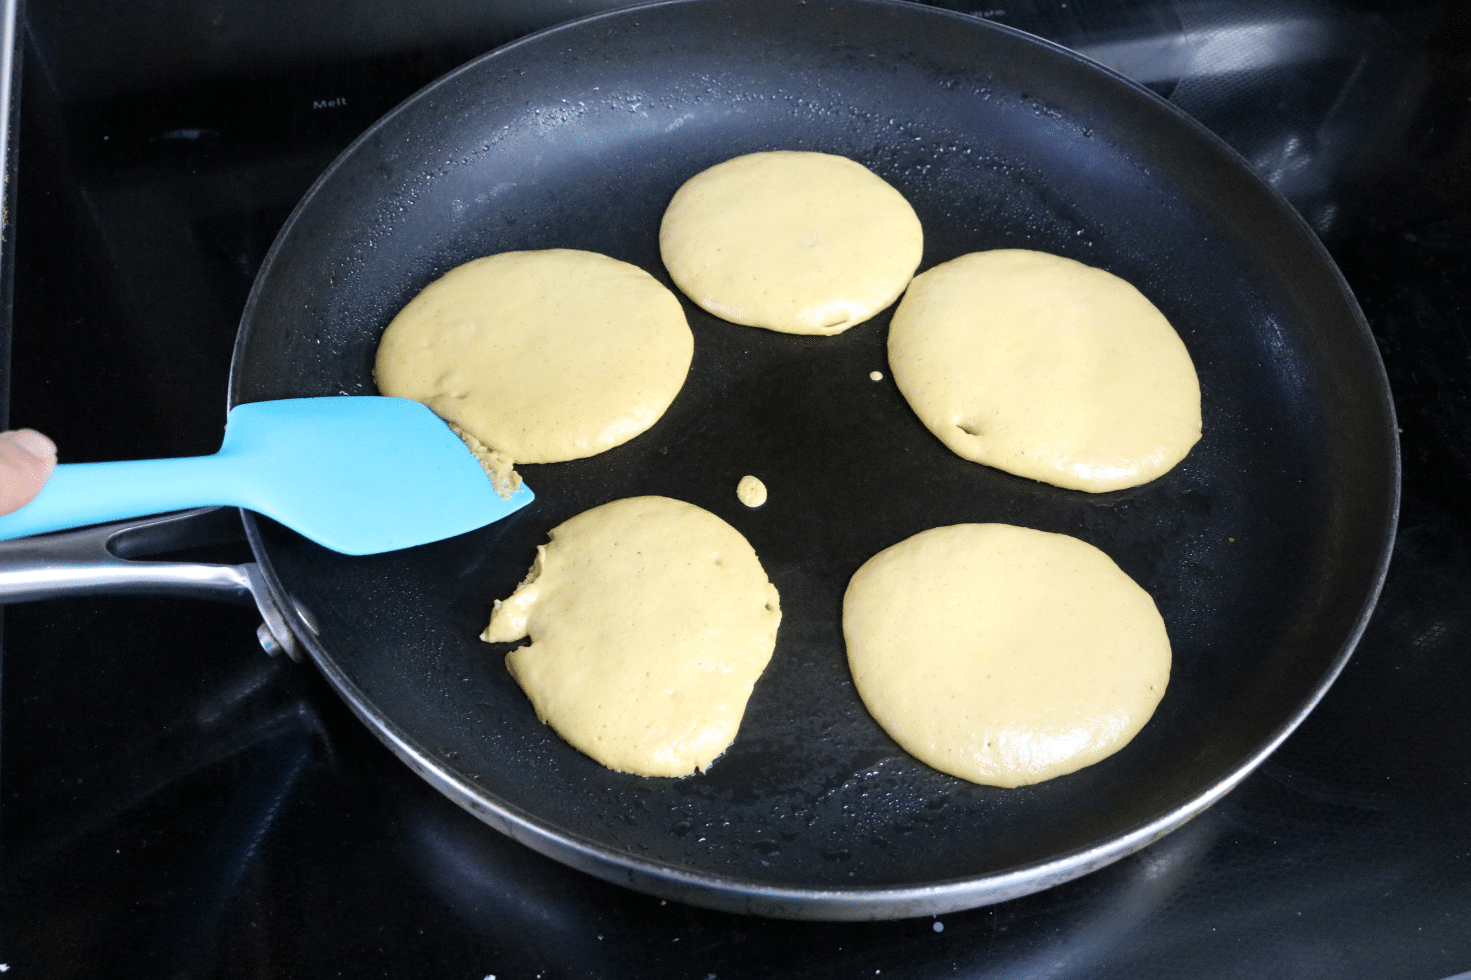 Five protein pancakes in a black pan with a blue spatula about to flip them